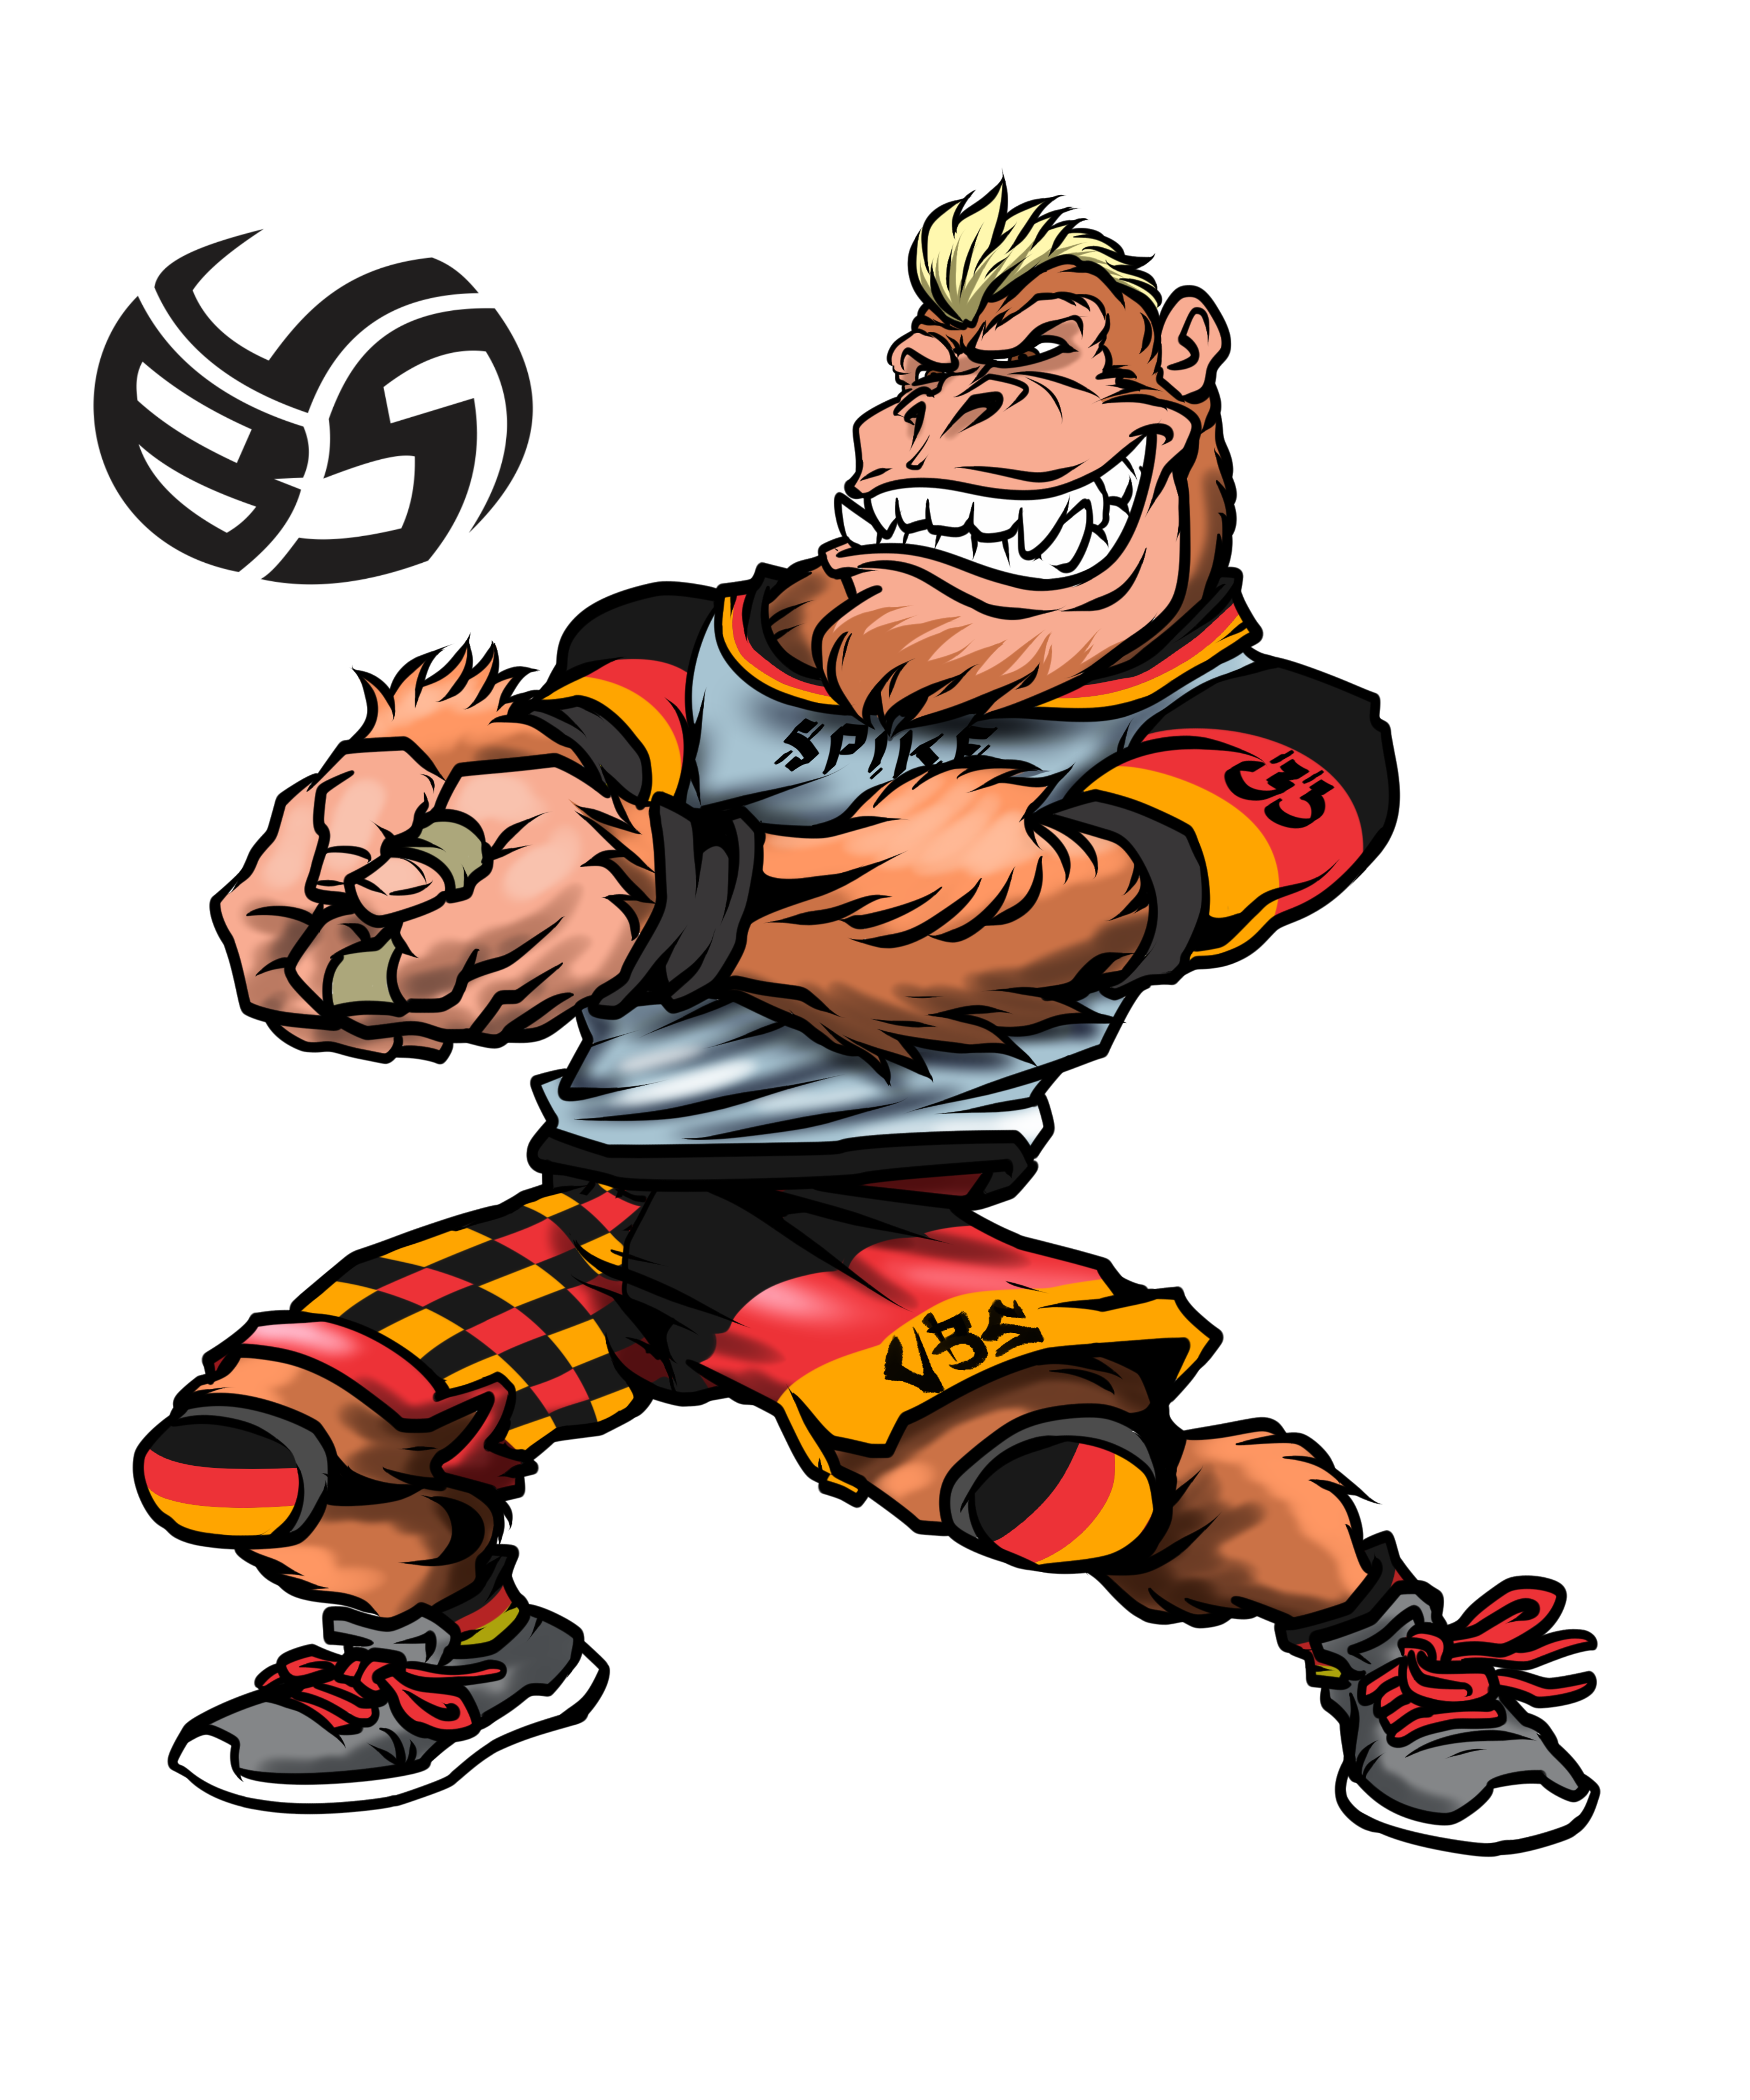 Animal T Shirt Ideas feature Spike the Gorilla - Middle Blocker 2 All VBS Beast Second Team in honor of the 2021 Olympics wears the German flag inspired volleyball uniform